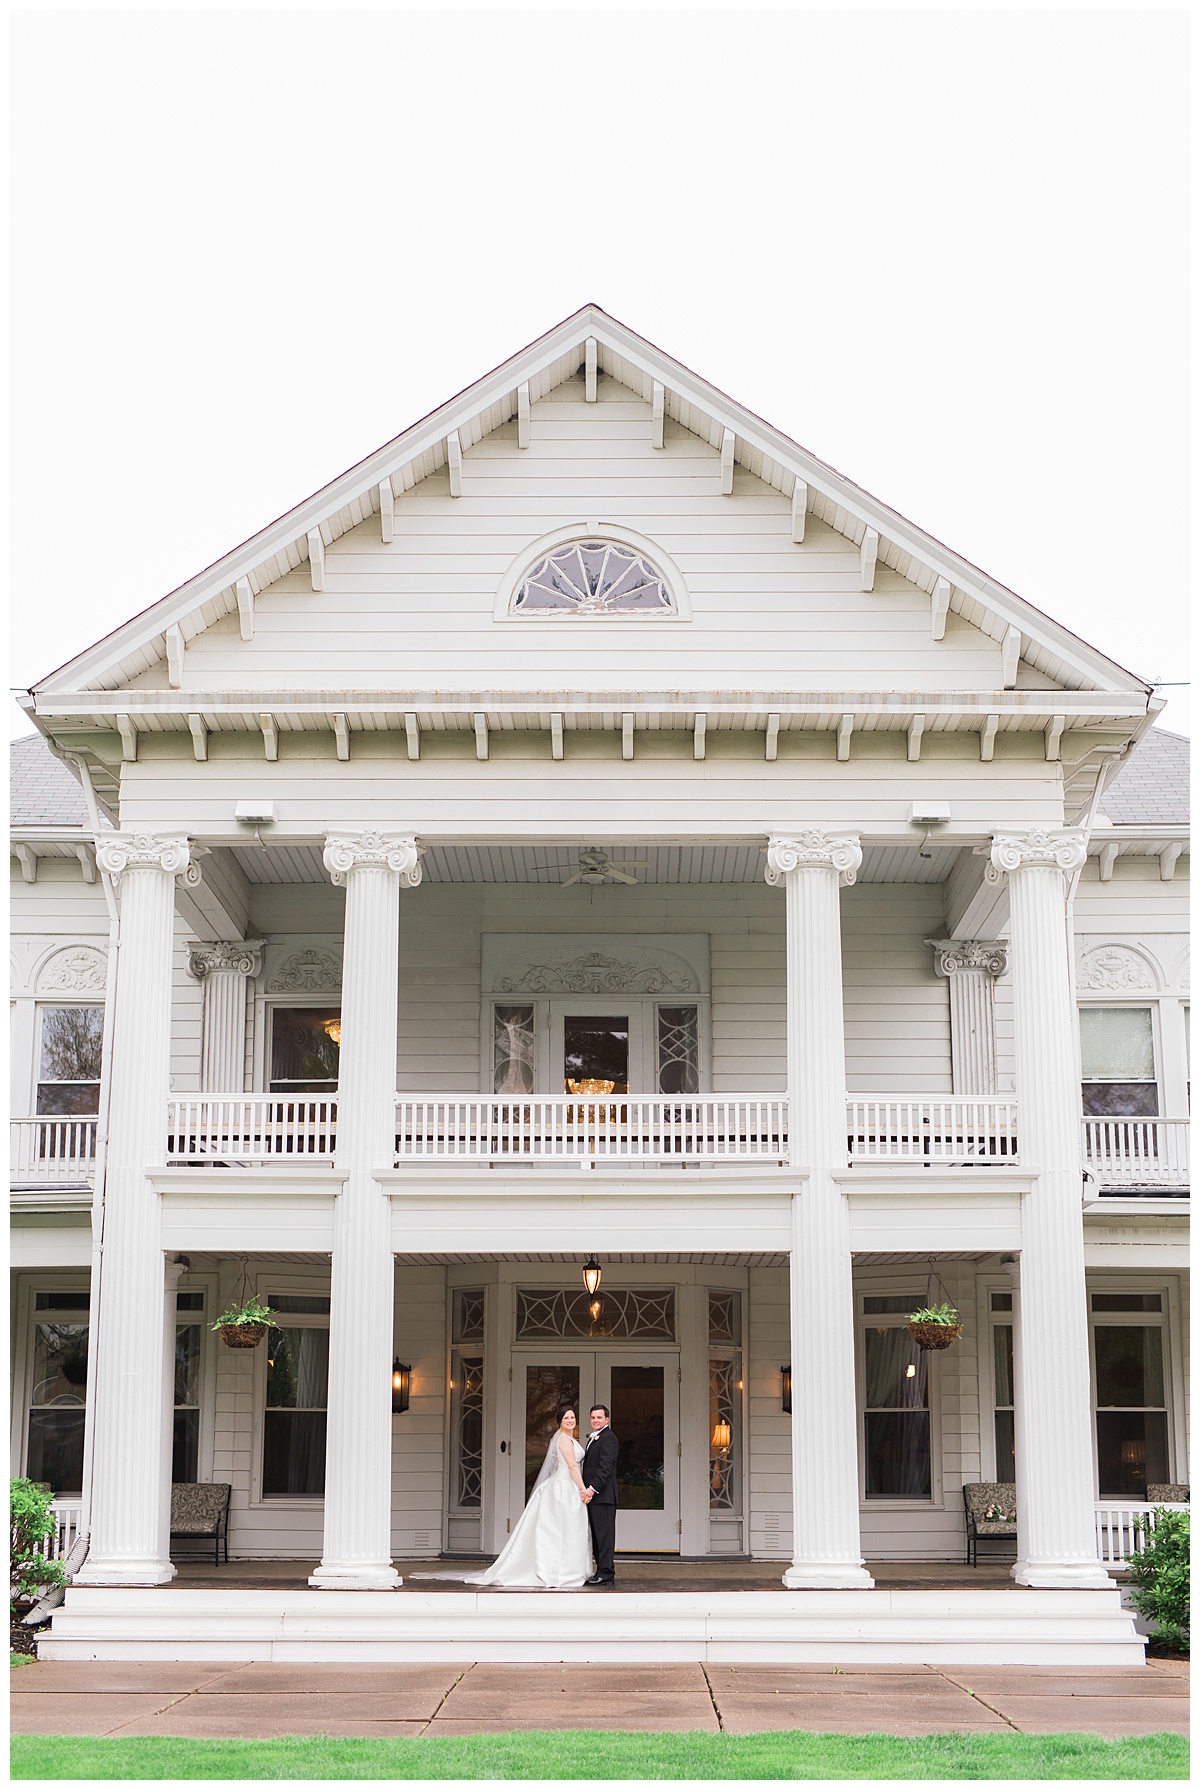 The Best Wedding Venues in the Quad Cities | Quad Cities Weddings